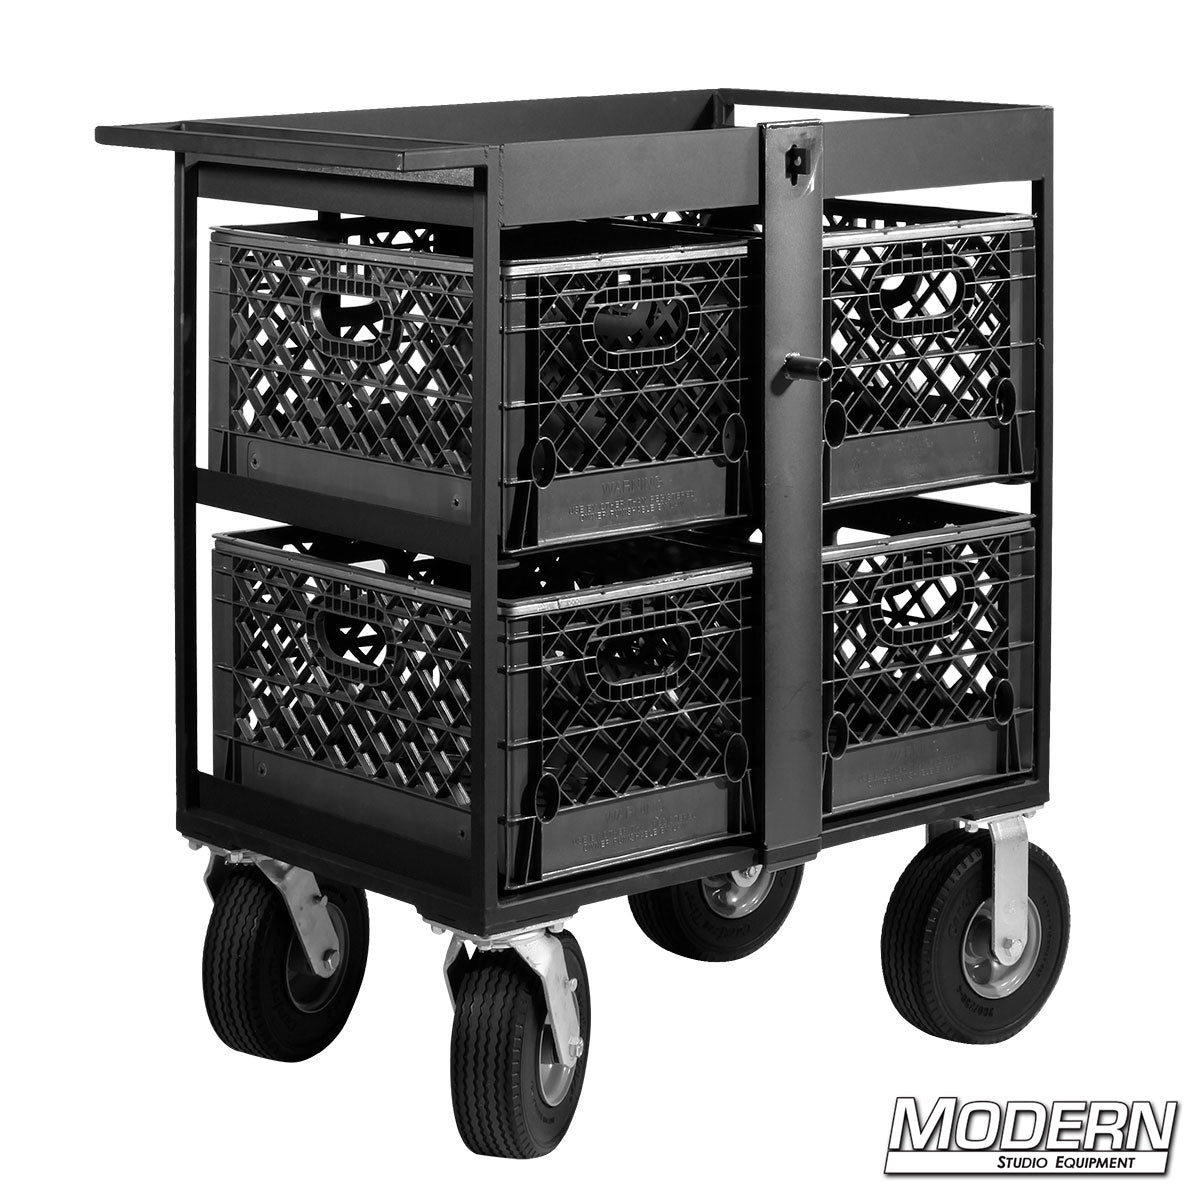 4 Place Milk Crate Cart Complete with Locking Bar